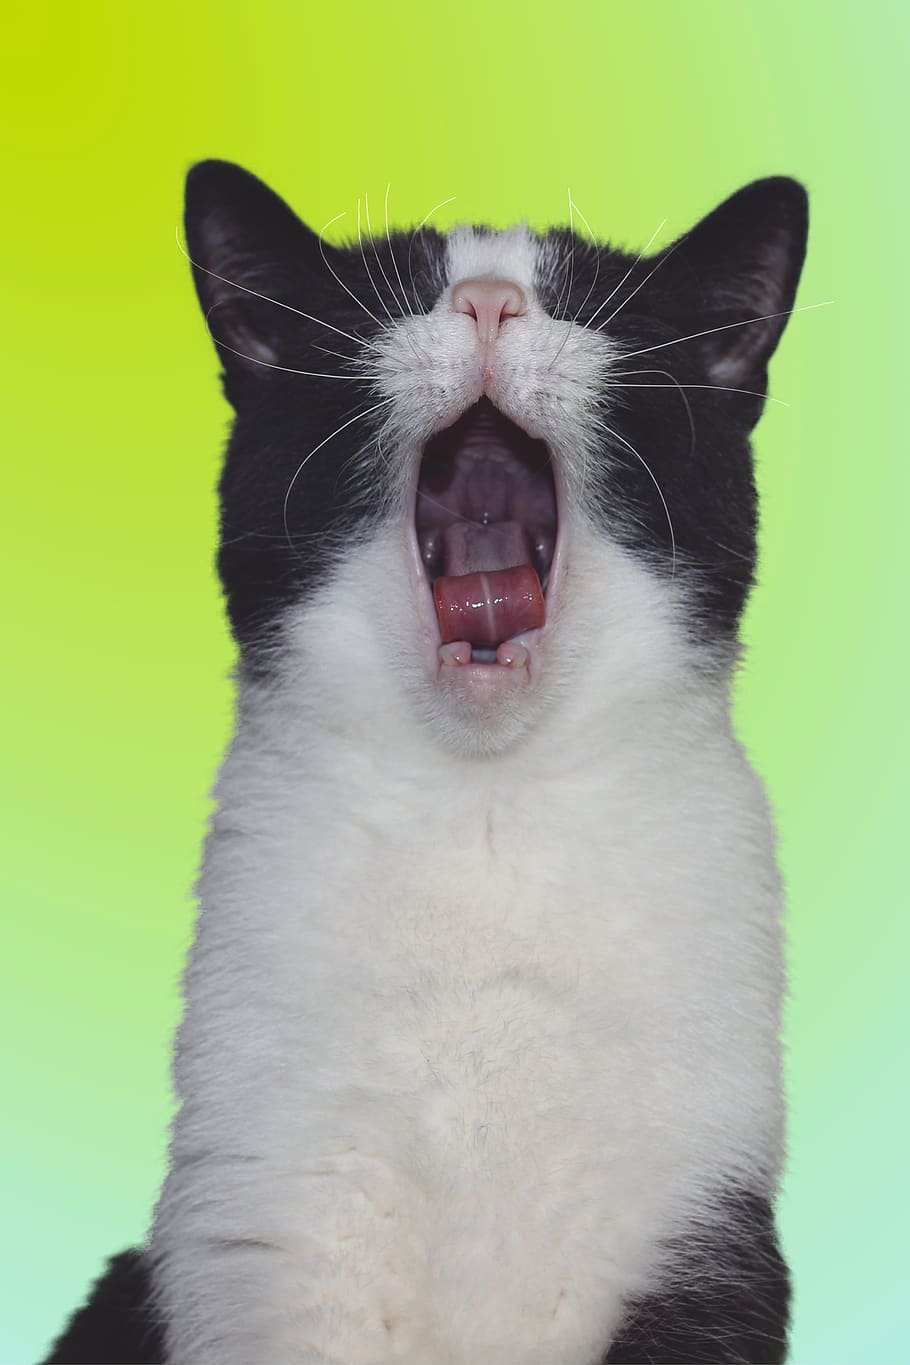 cat, yawning, tooth, cute, animal, pet, cat tongue, hide nose, screaming, funny